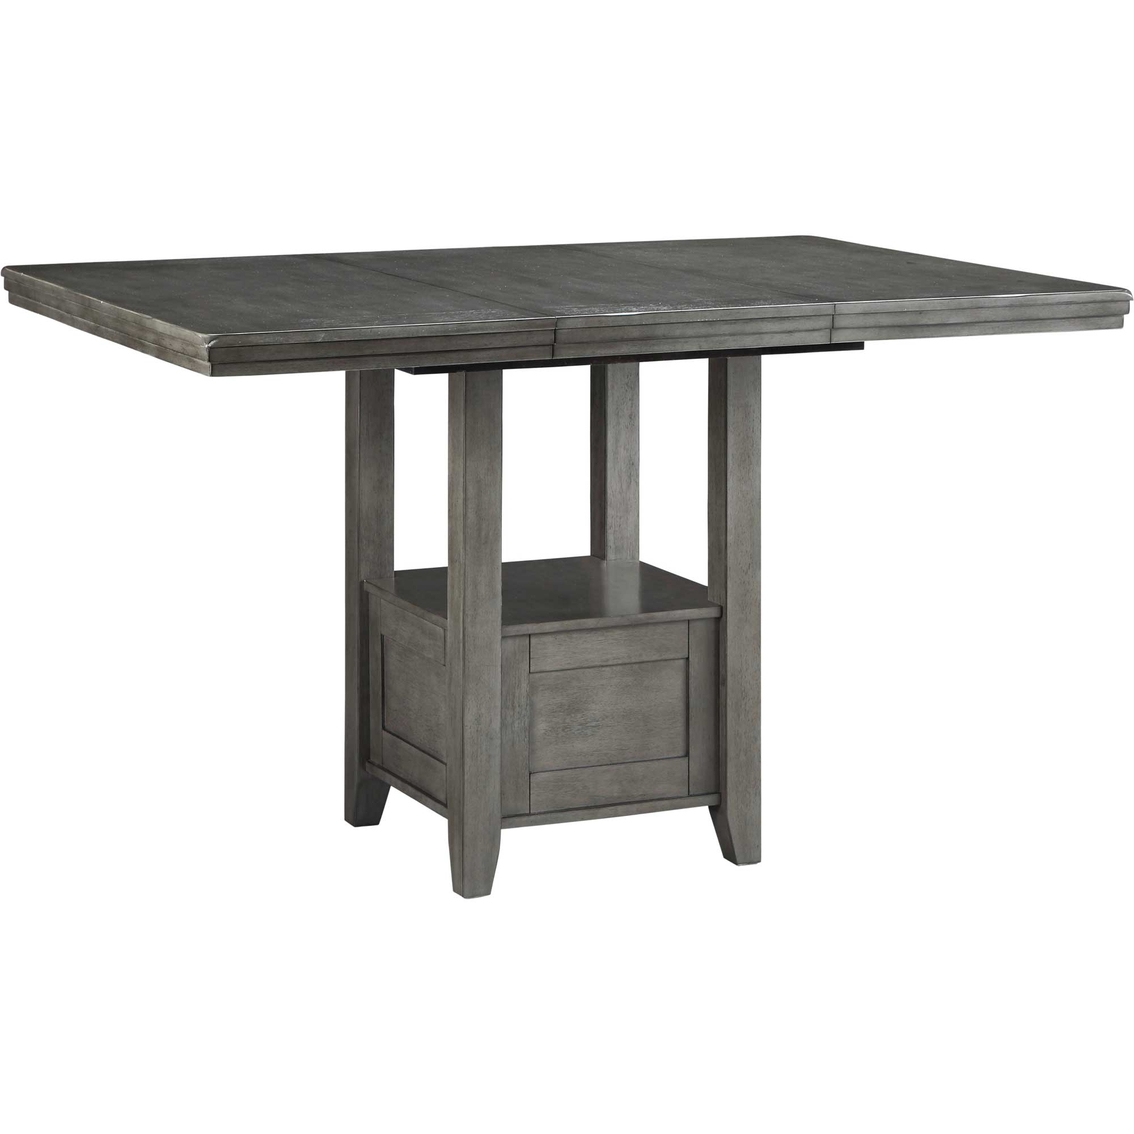 Signature Design by Ashley Hallanden 7 pc. Counter Dining Set - Image 2 of 7